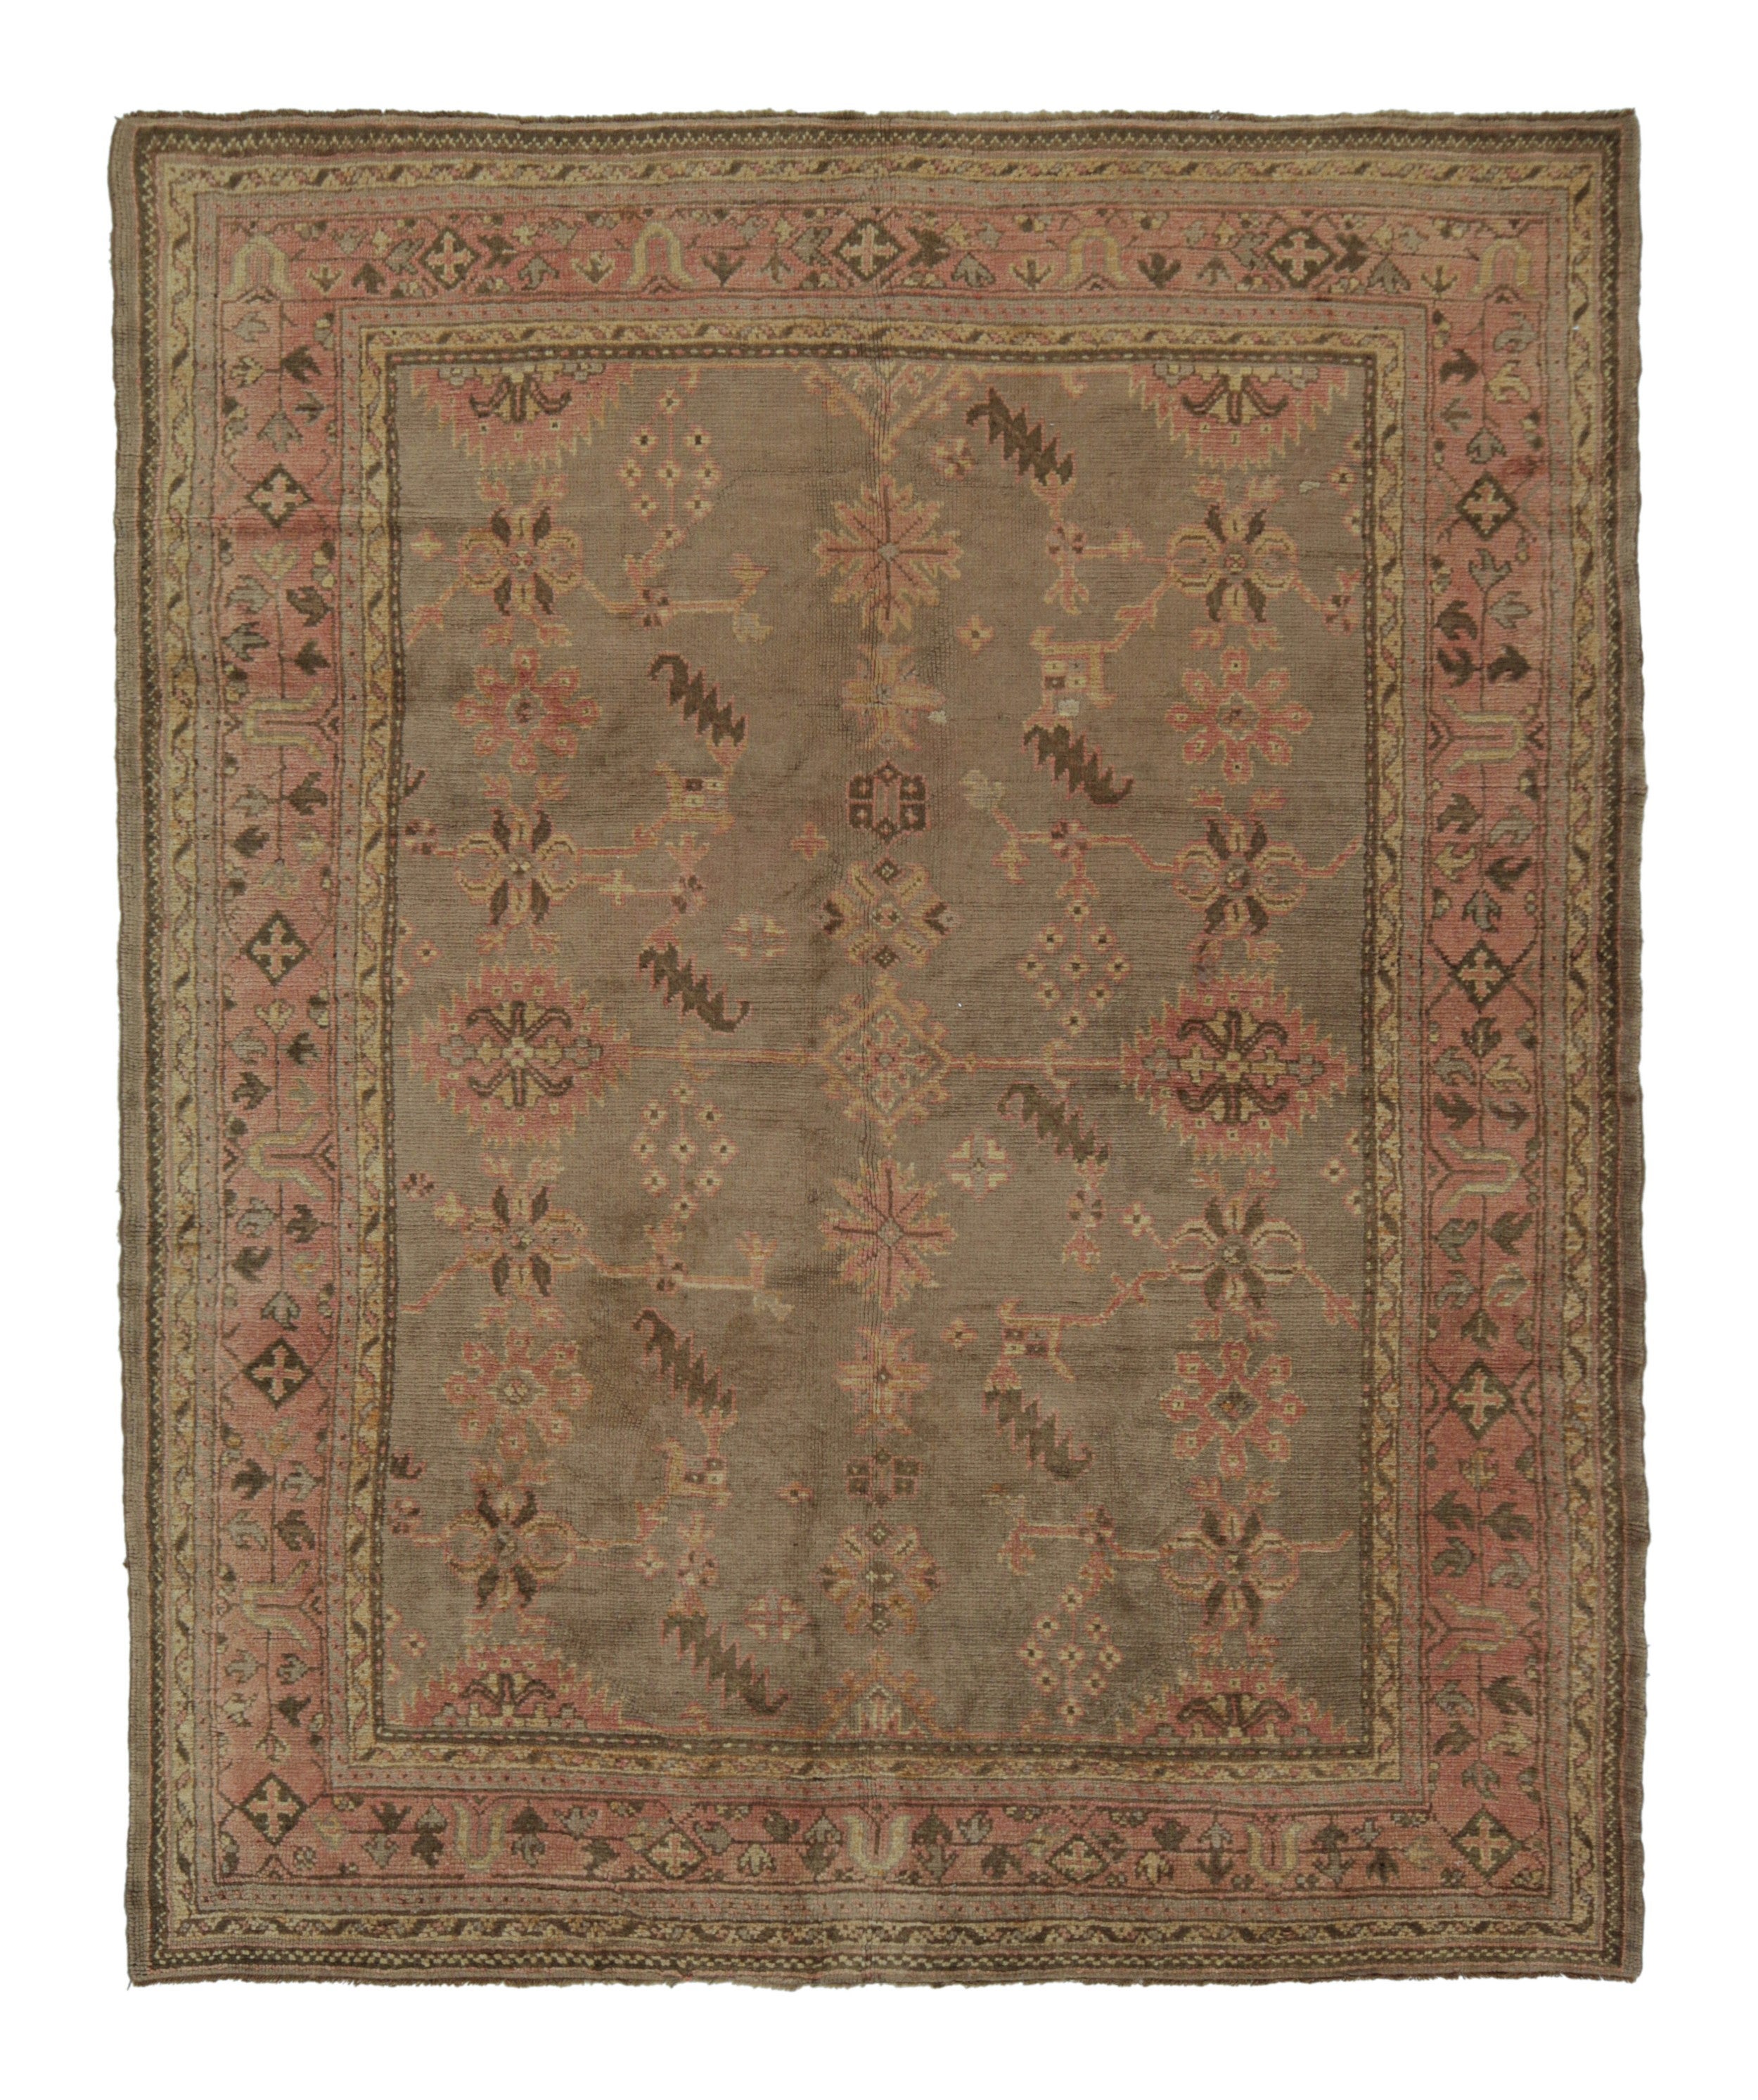 Vintage Oushak Rug with Beige-Brown and Pink Floral Patterns, from Rug & Kilim